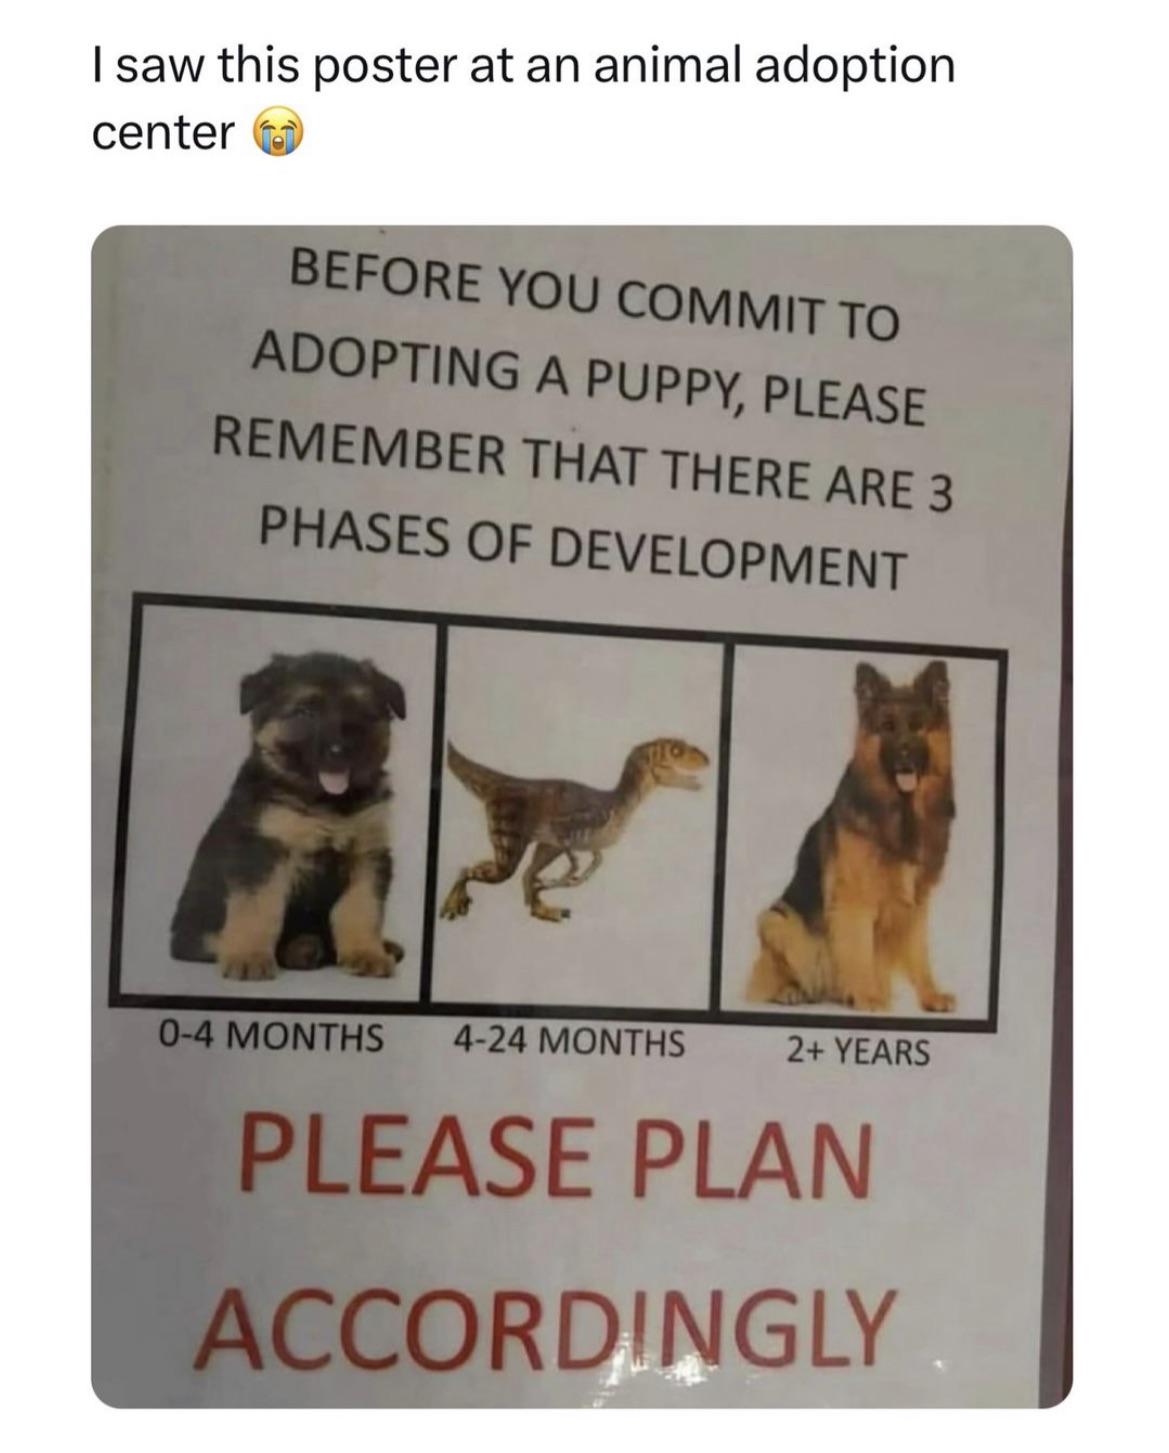 before you commit to adopting a puppy please remember that there are 3 phases of development - I saw this poster at an animal adoption center Before You Commit To Adopting A Puppy, Please Remember That There Are 3 Phases Of Development 04 Months 424 Month